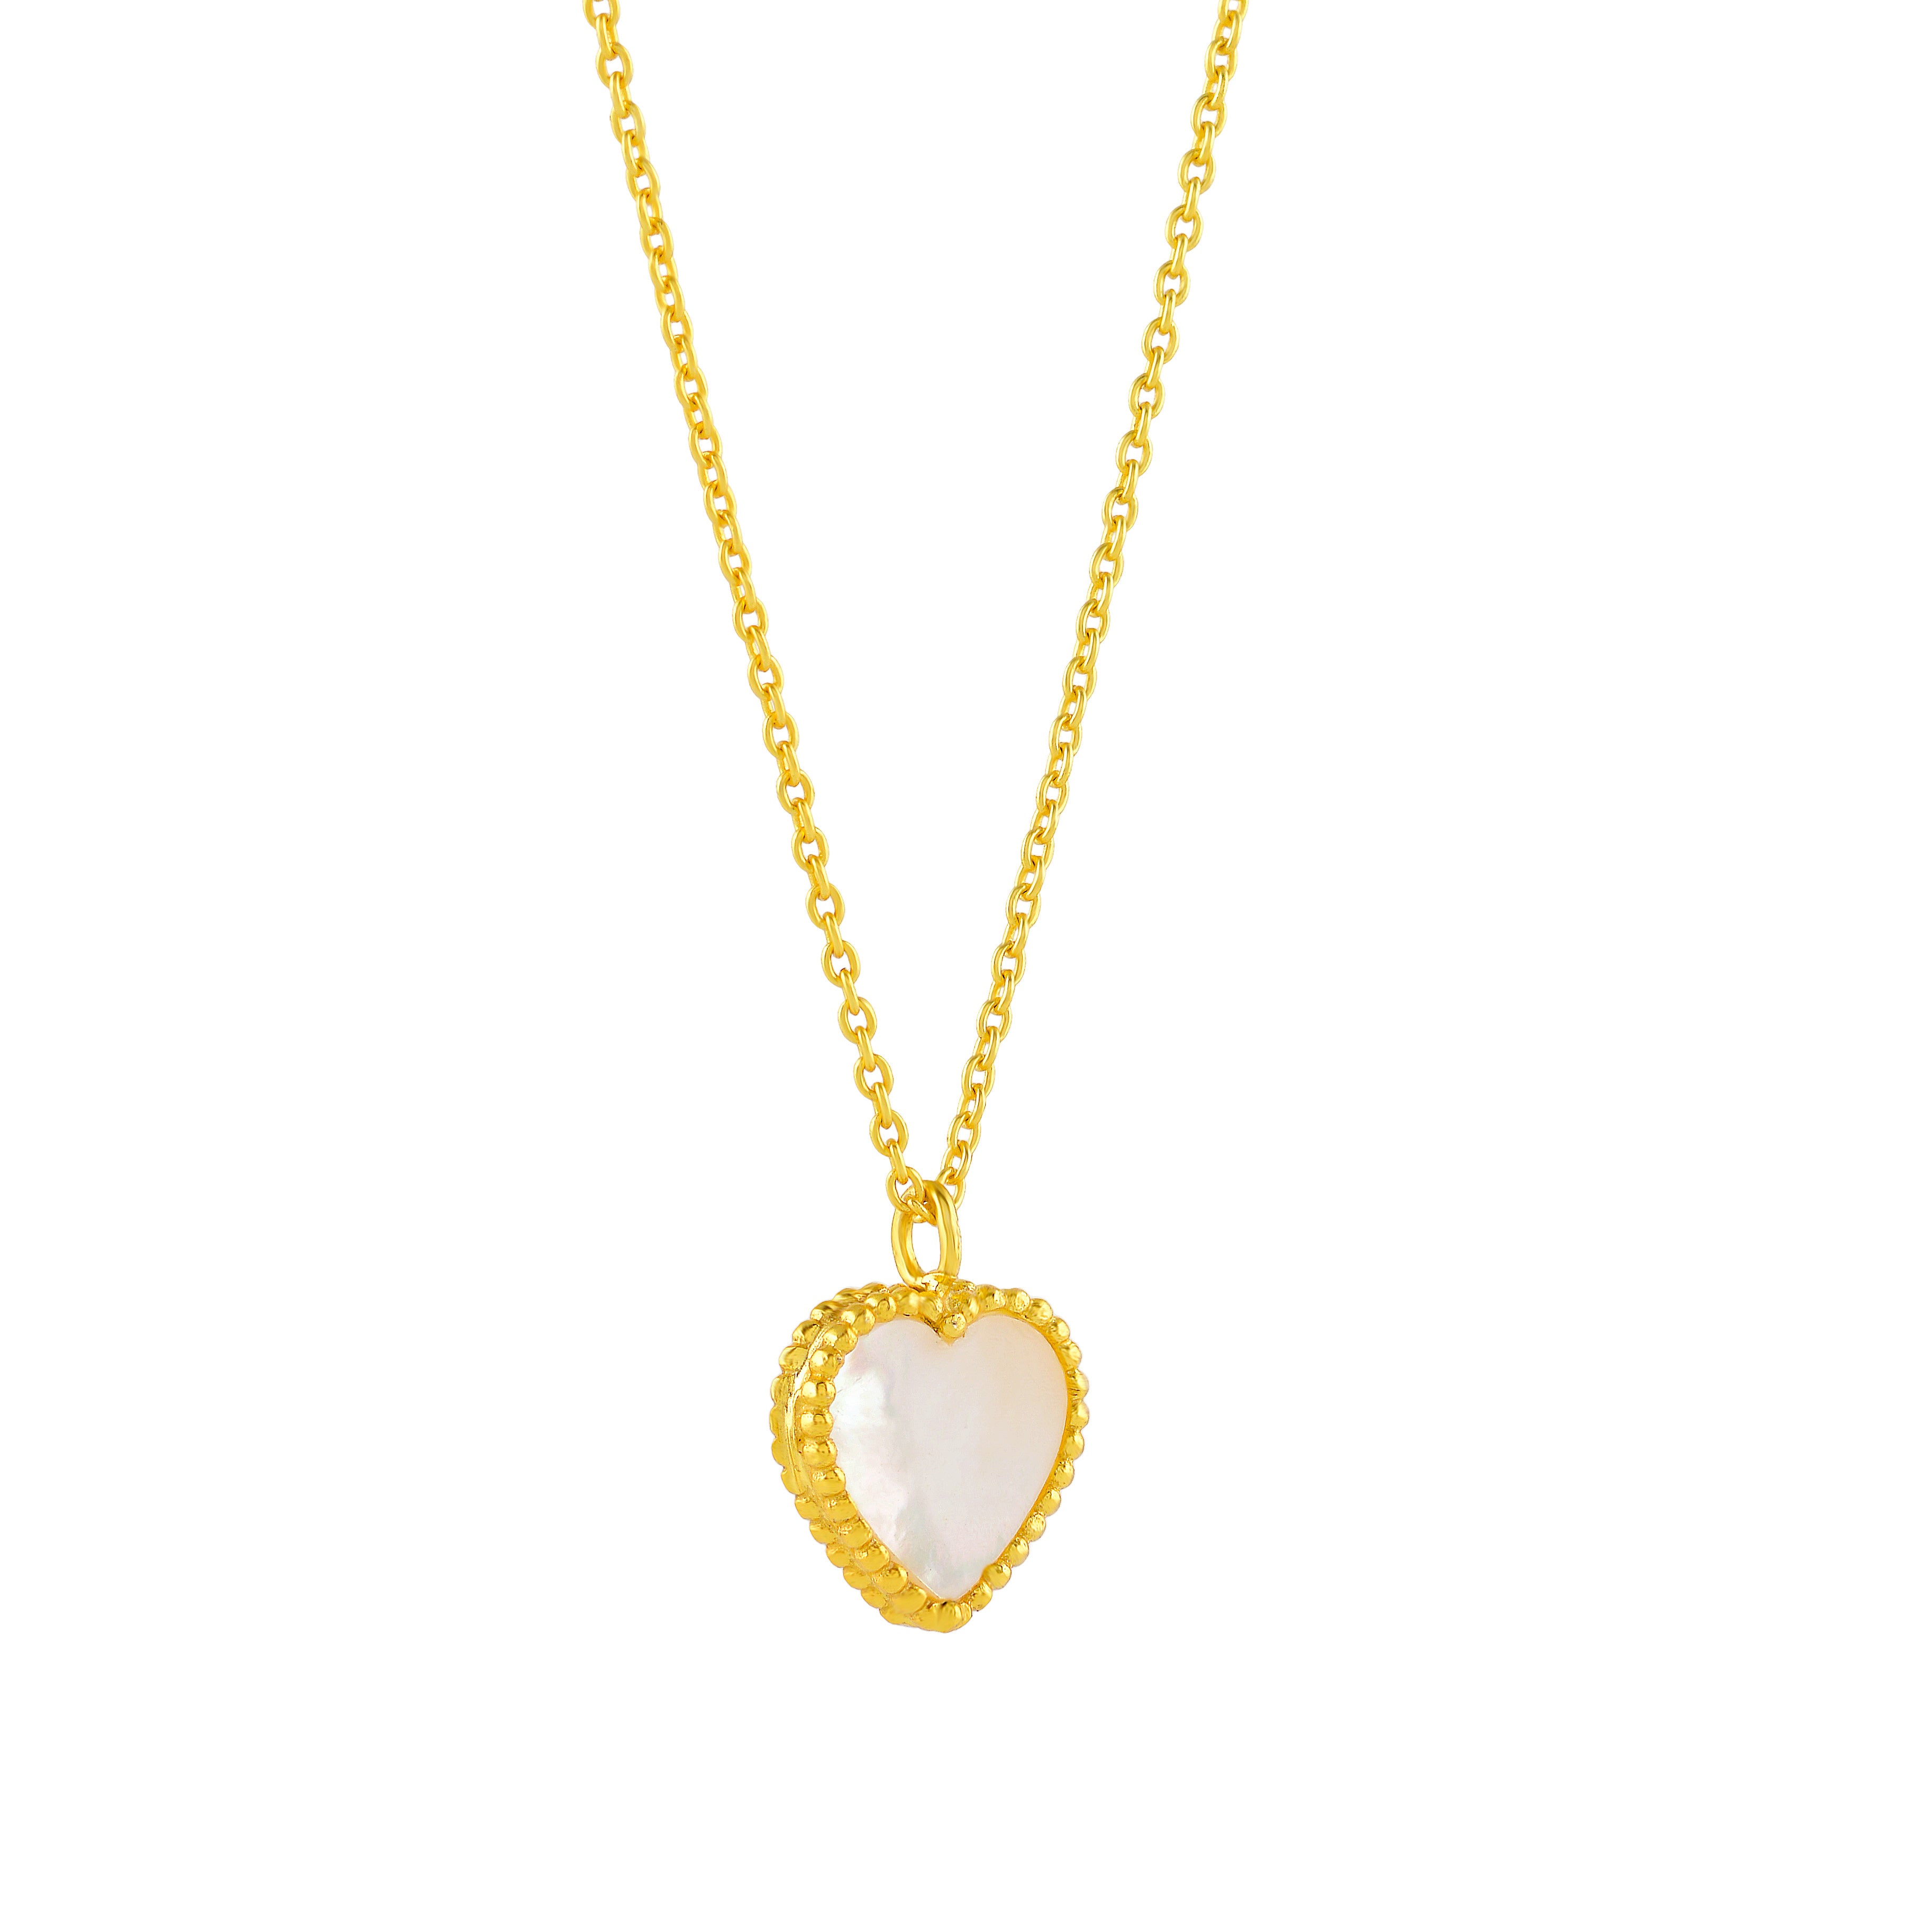 Captivating Heart Stone Necklace - Krishna Jewellers Pearls and Gems